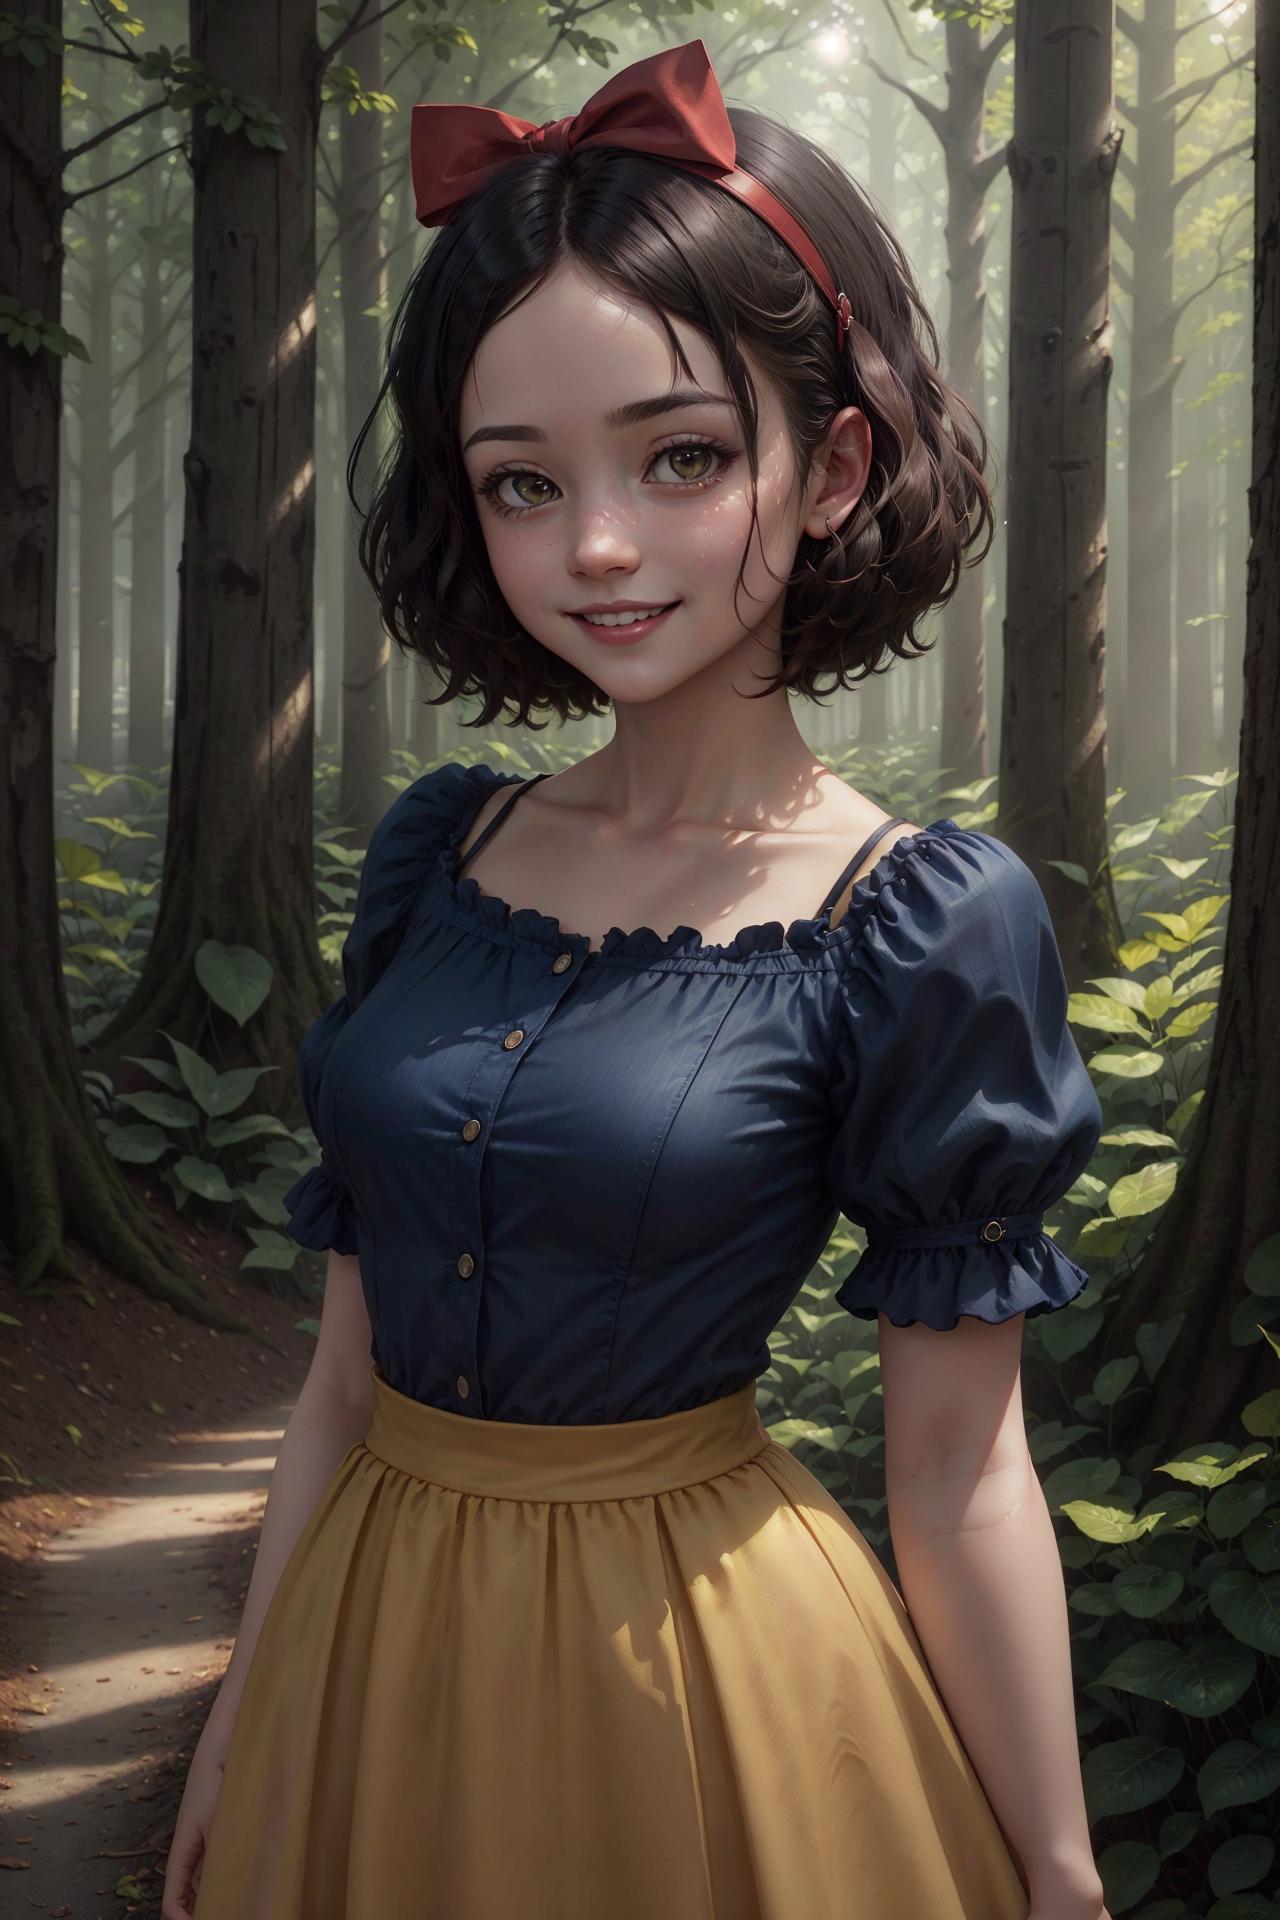 A young woman wearing a blue dress and a yellow skirt standing in a forest.